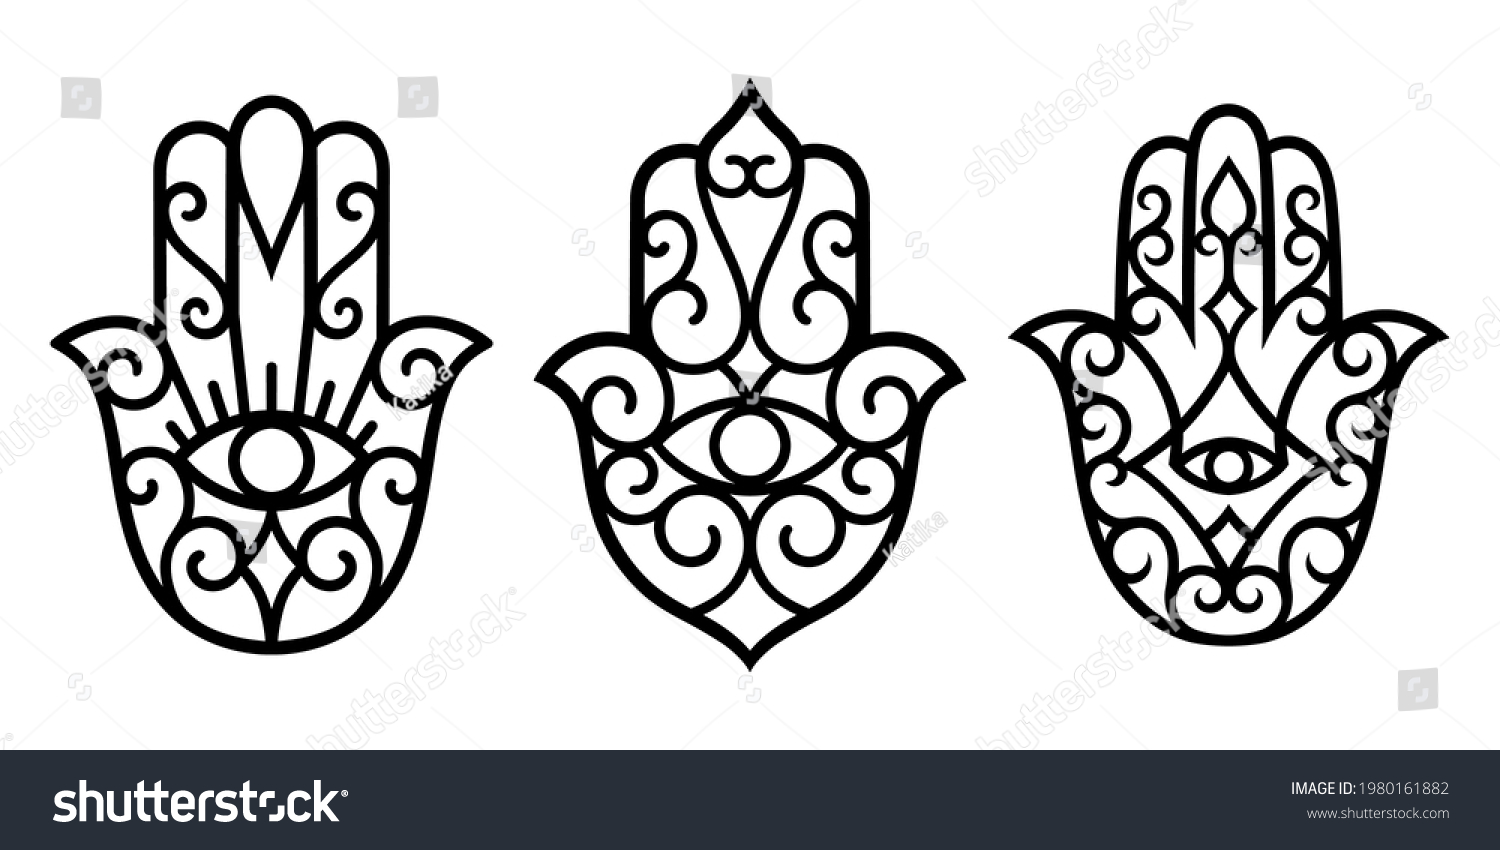 Set of decorative hamsa symbols with eye. Elements of patterns for laser and plotter cutting, embossing, engraving, printing on clothing. Ornaments for henna drawings in the oriental style. #1980161882